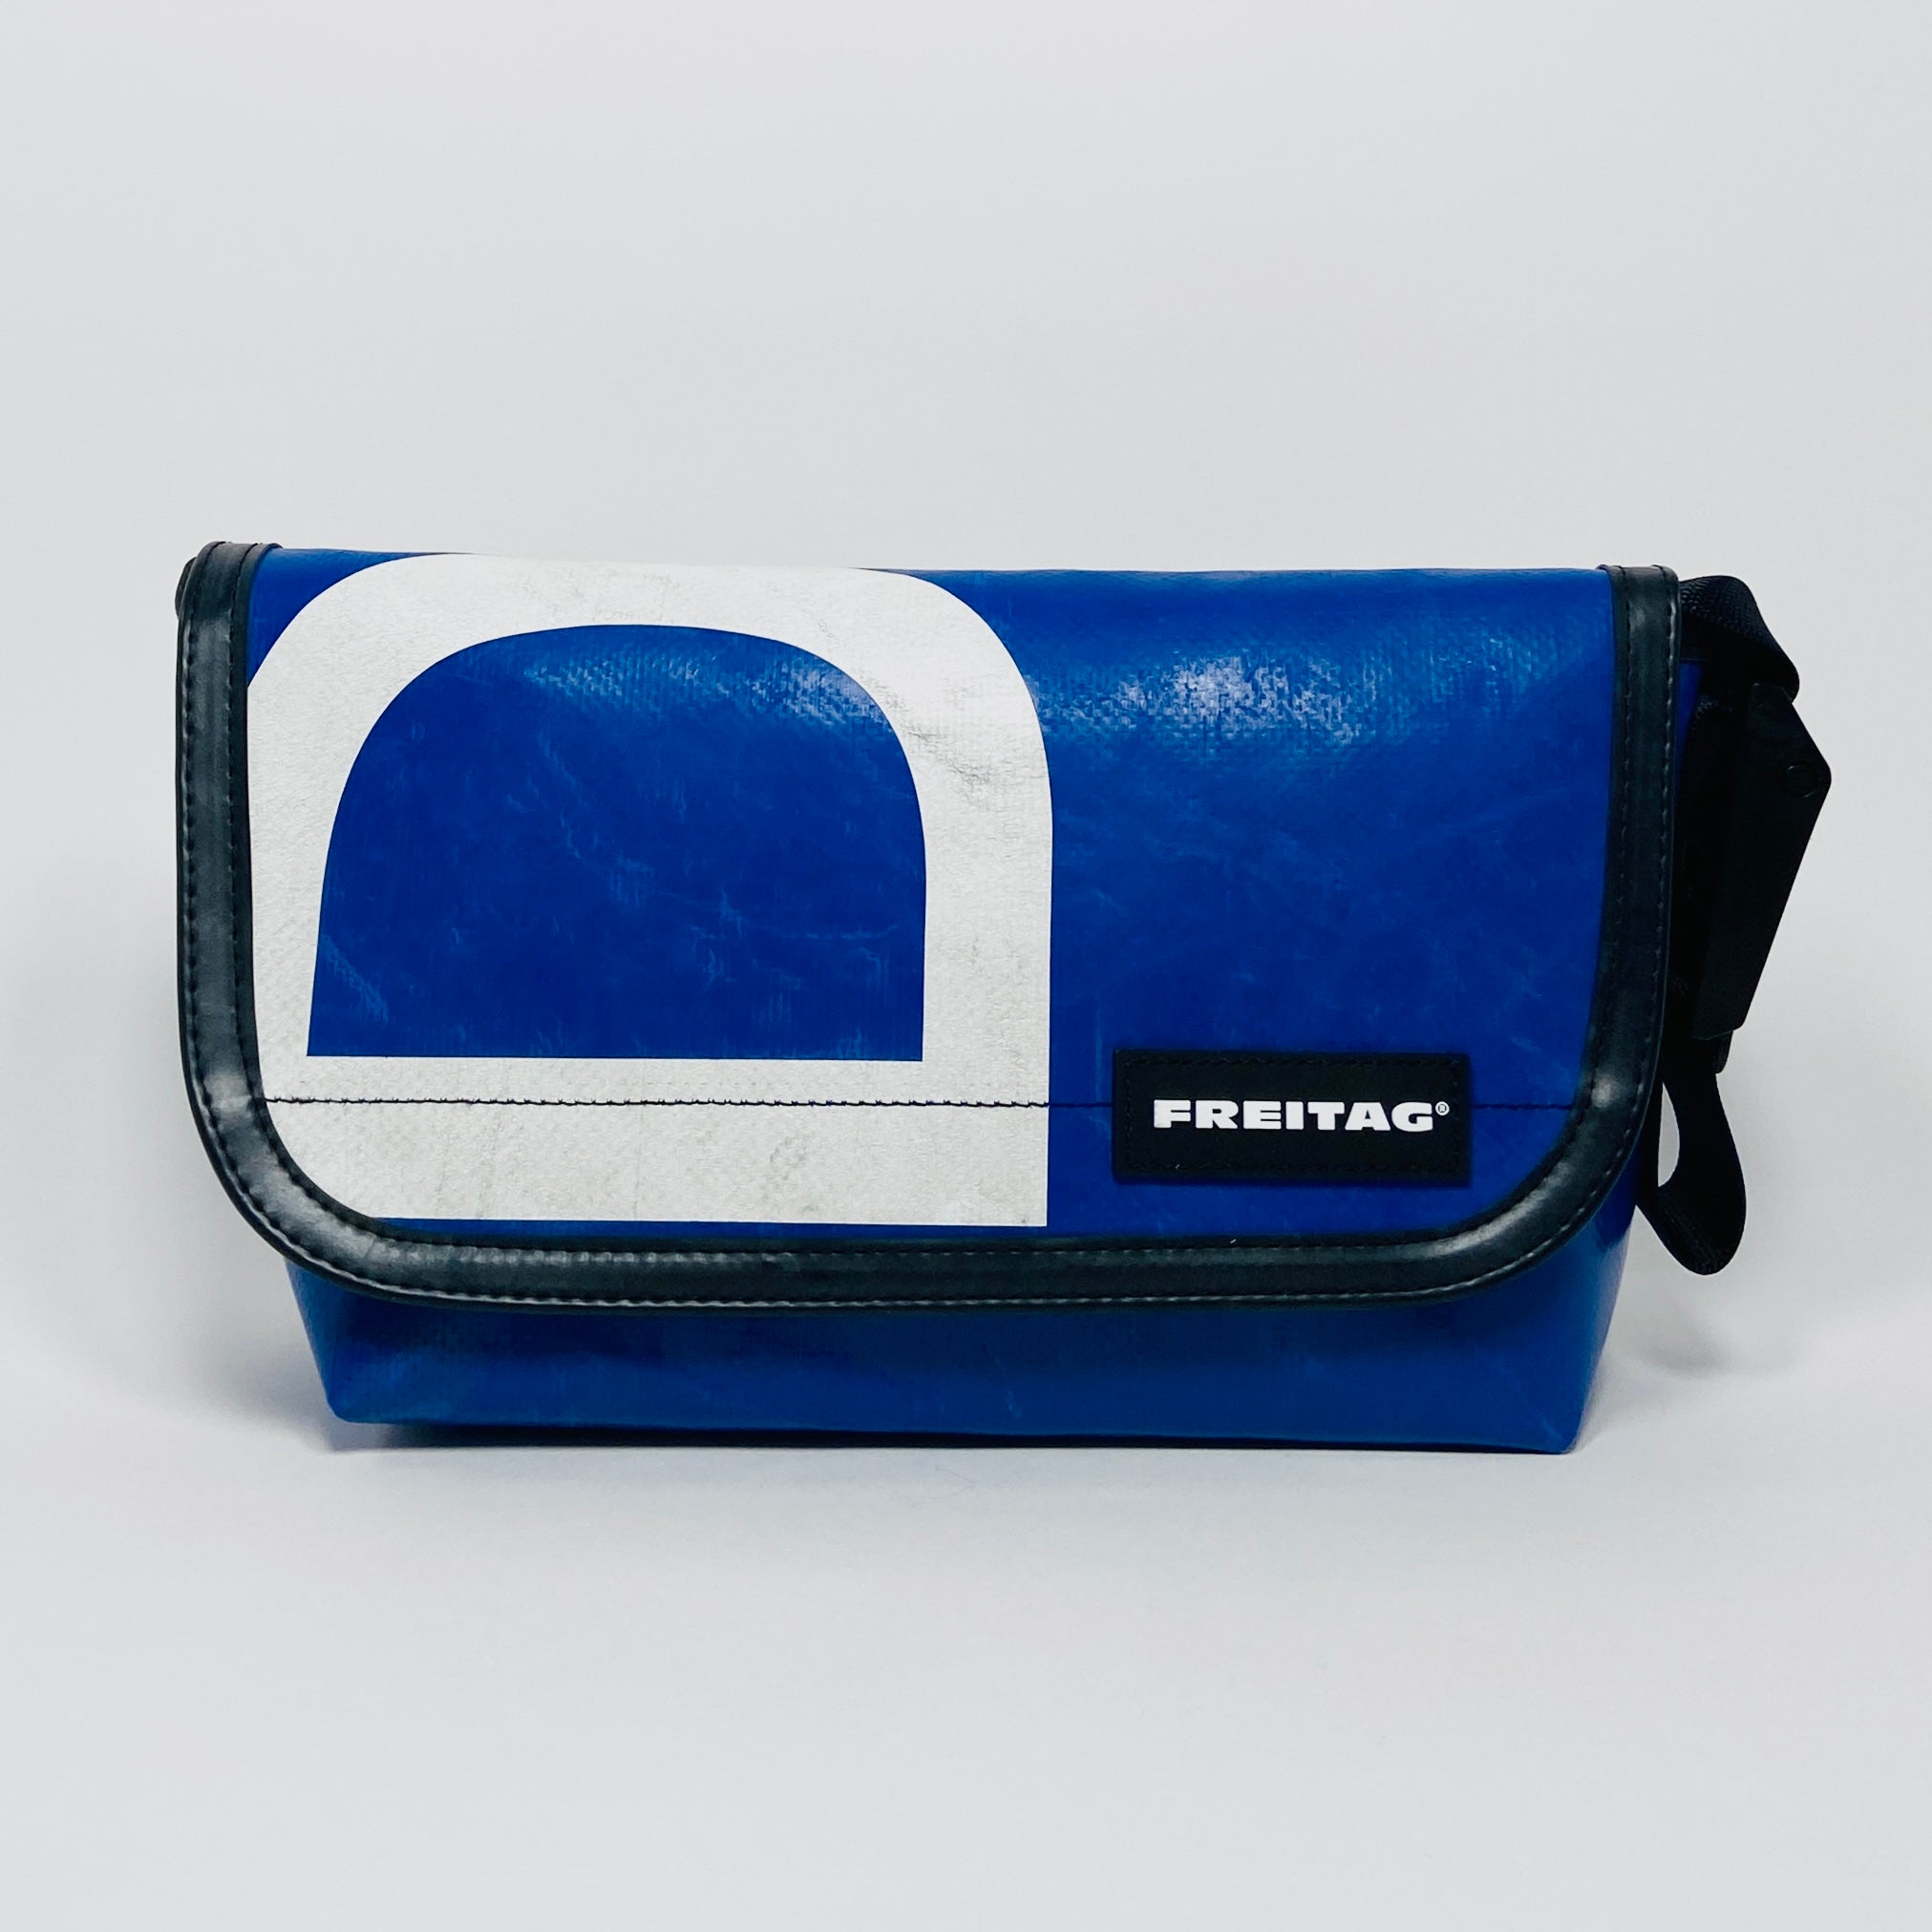 FREITAG F41 - Hawaii Five-0 - Blue with White Typography | UNITOM